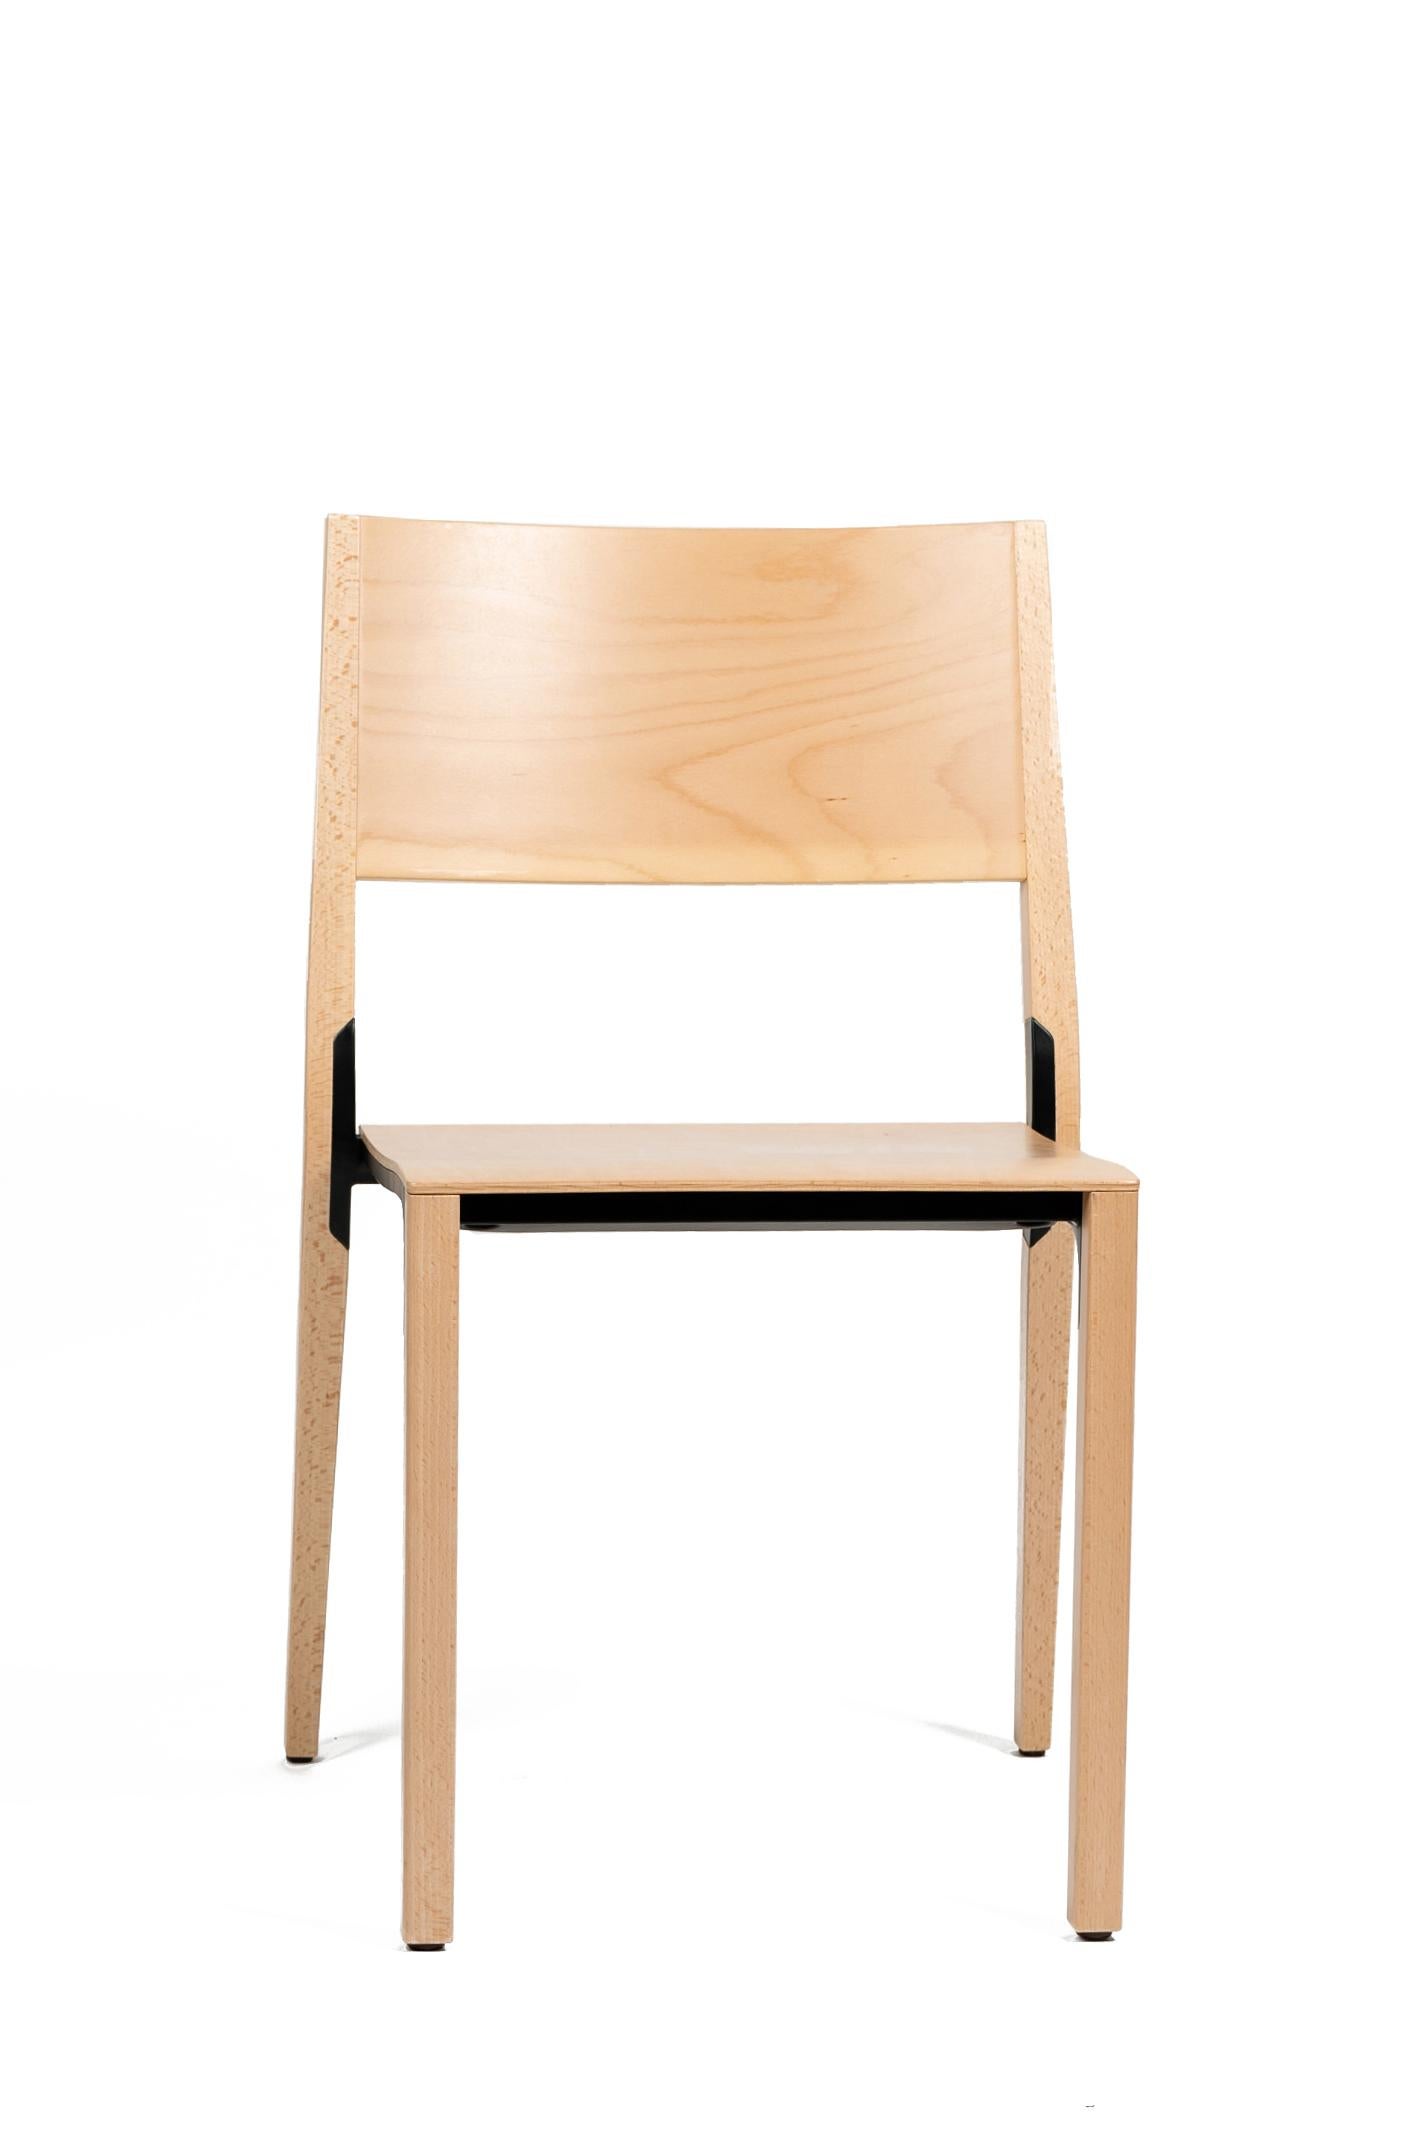 End of Series

Base is a favorite of architects. The chair is a high-end piece of engineering with its aluminum die-cast frame, and the wood/metal screw-less patented connection from Dietiker. 

Designed by Greutmann Bolzern in 2003.

In 1984,